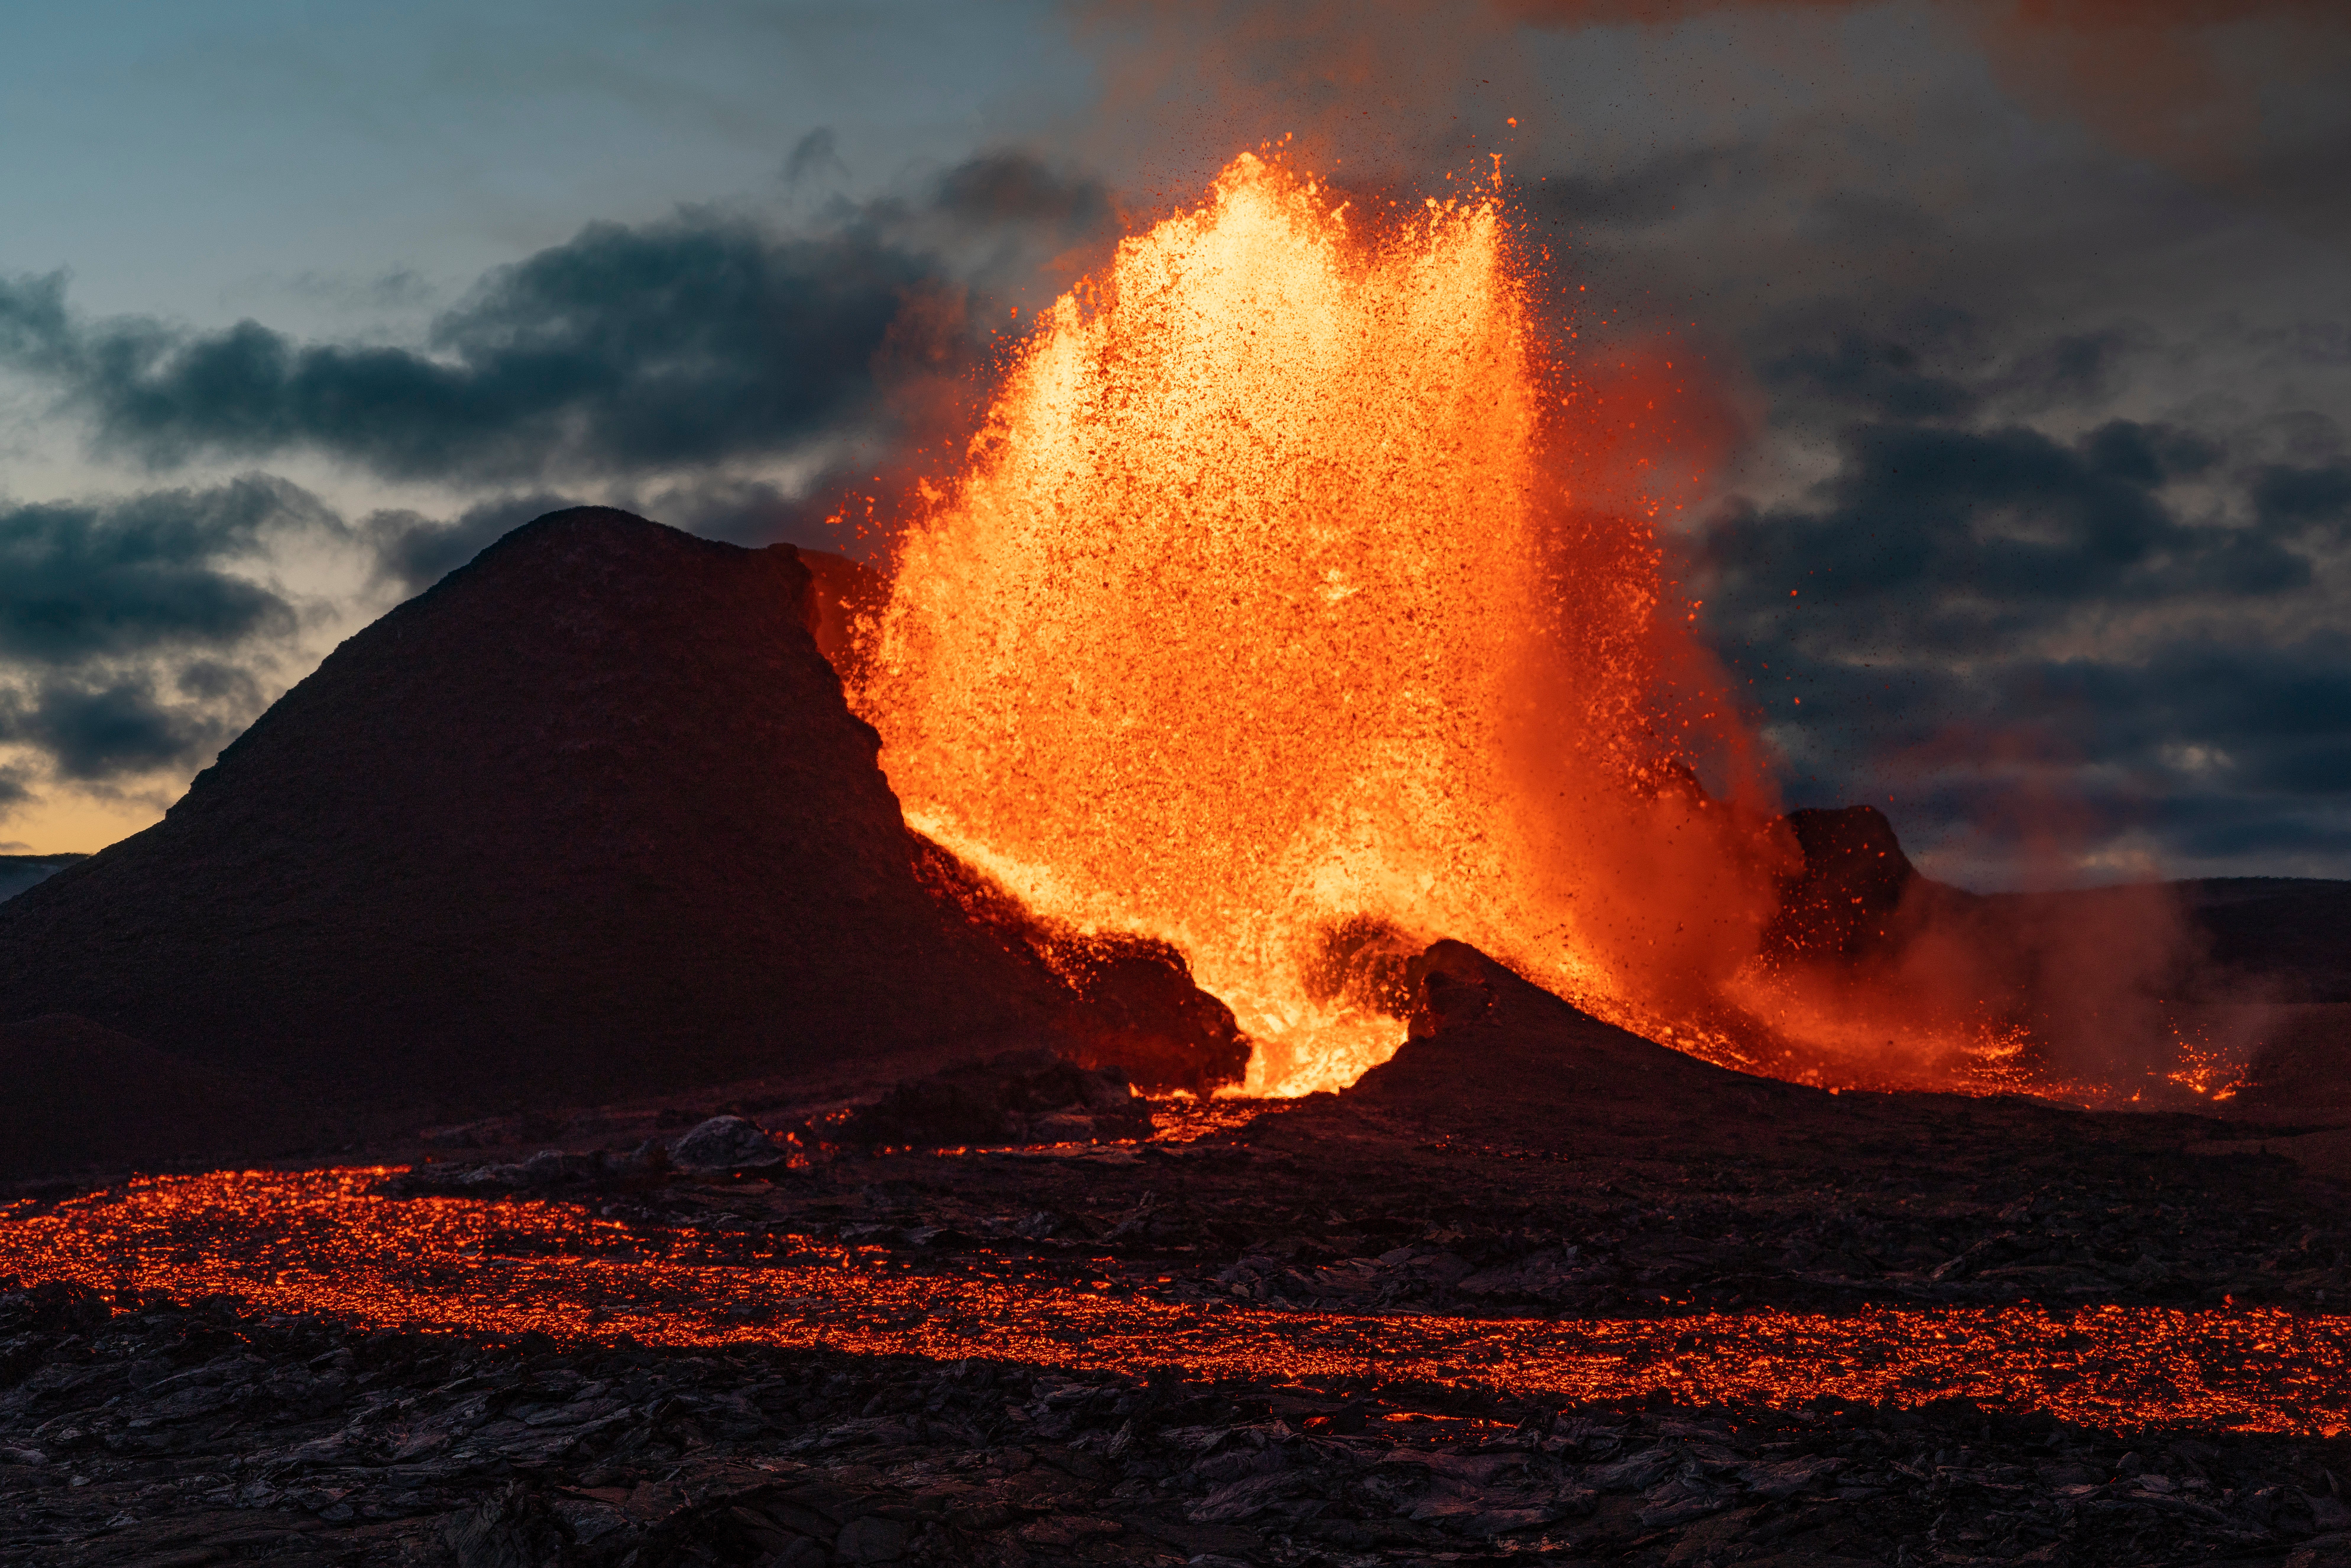 Lava flows from an eruption of the Fagradalsfjall volcano on the Reykjanes Peninsula in southwestern Iceland on Tuesday, May 11, 2021